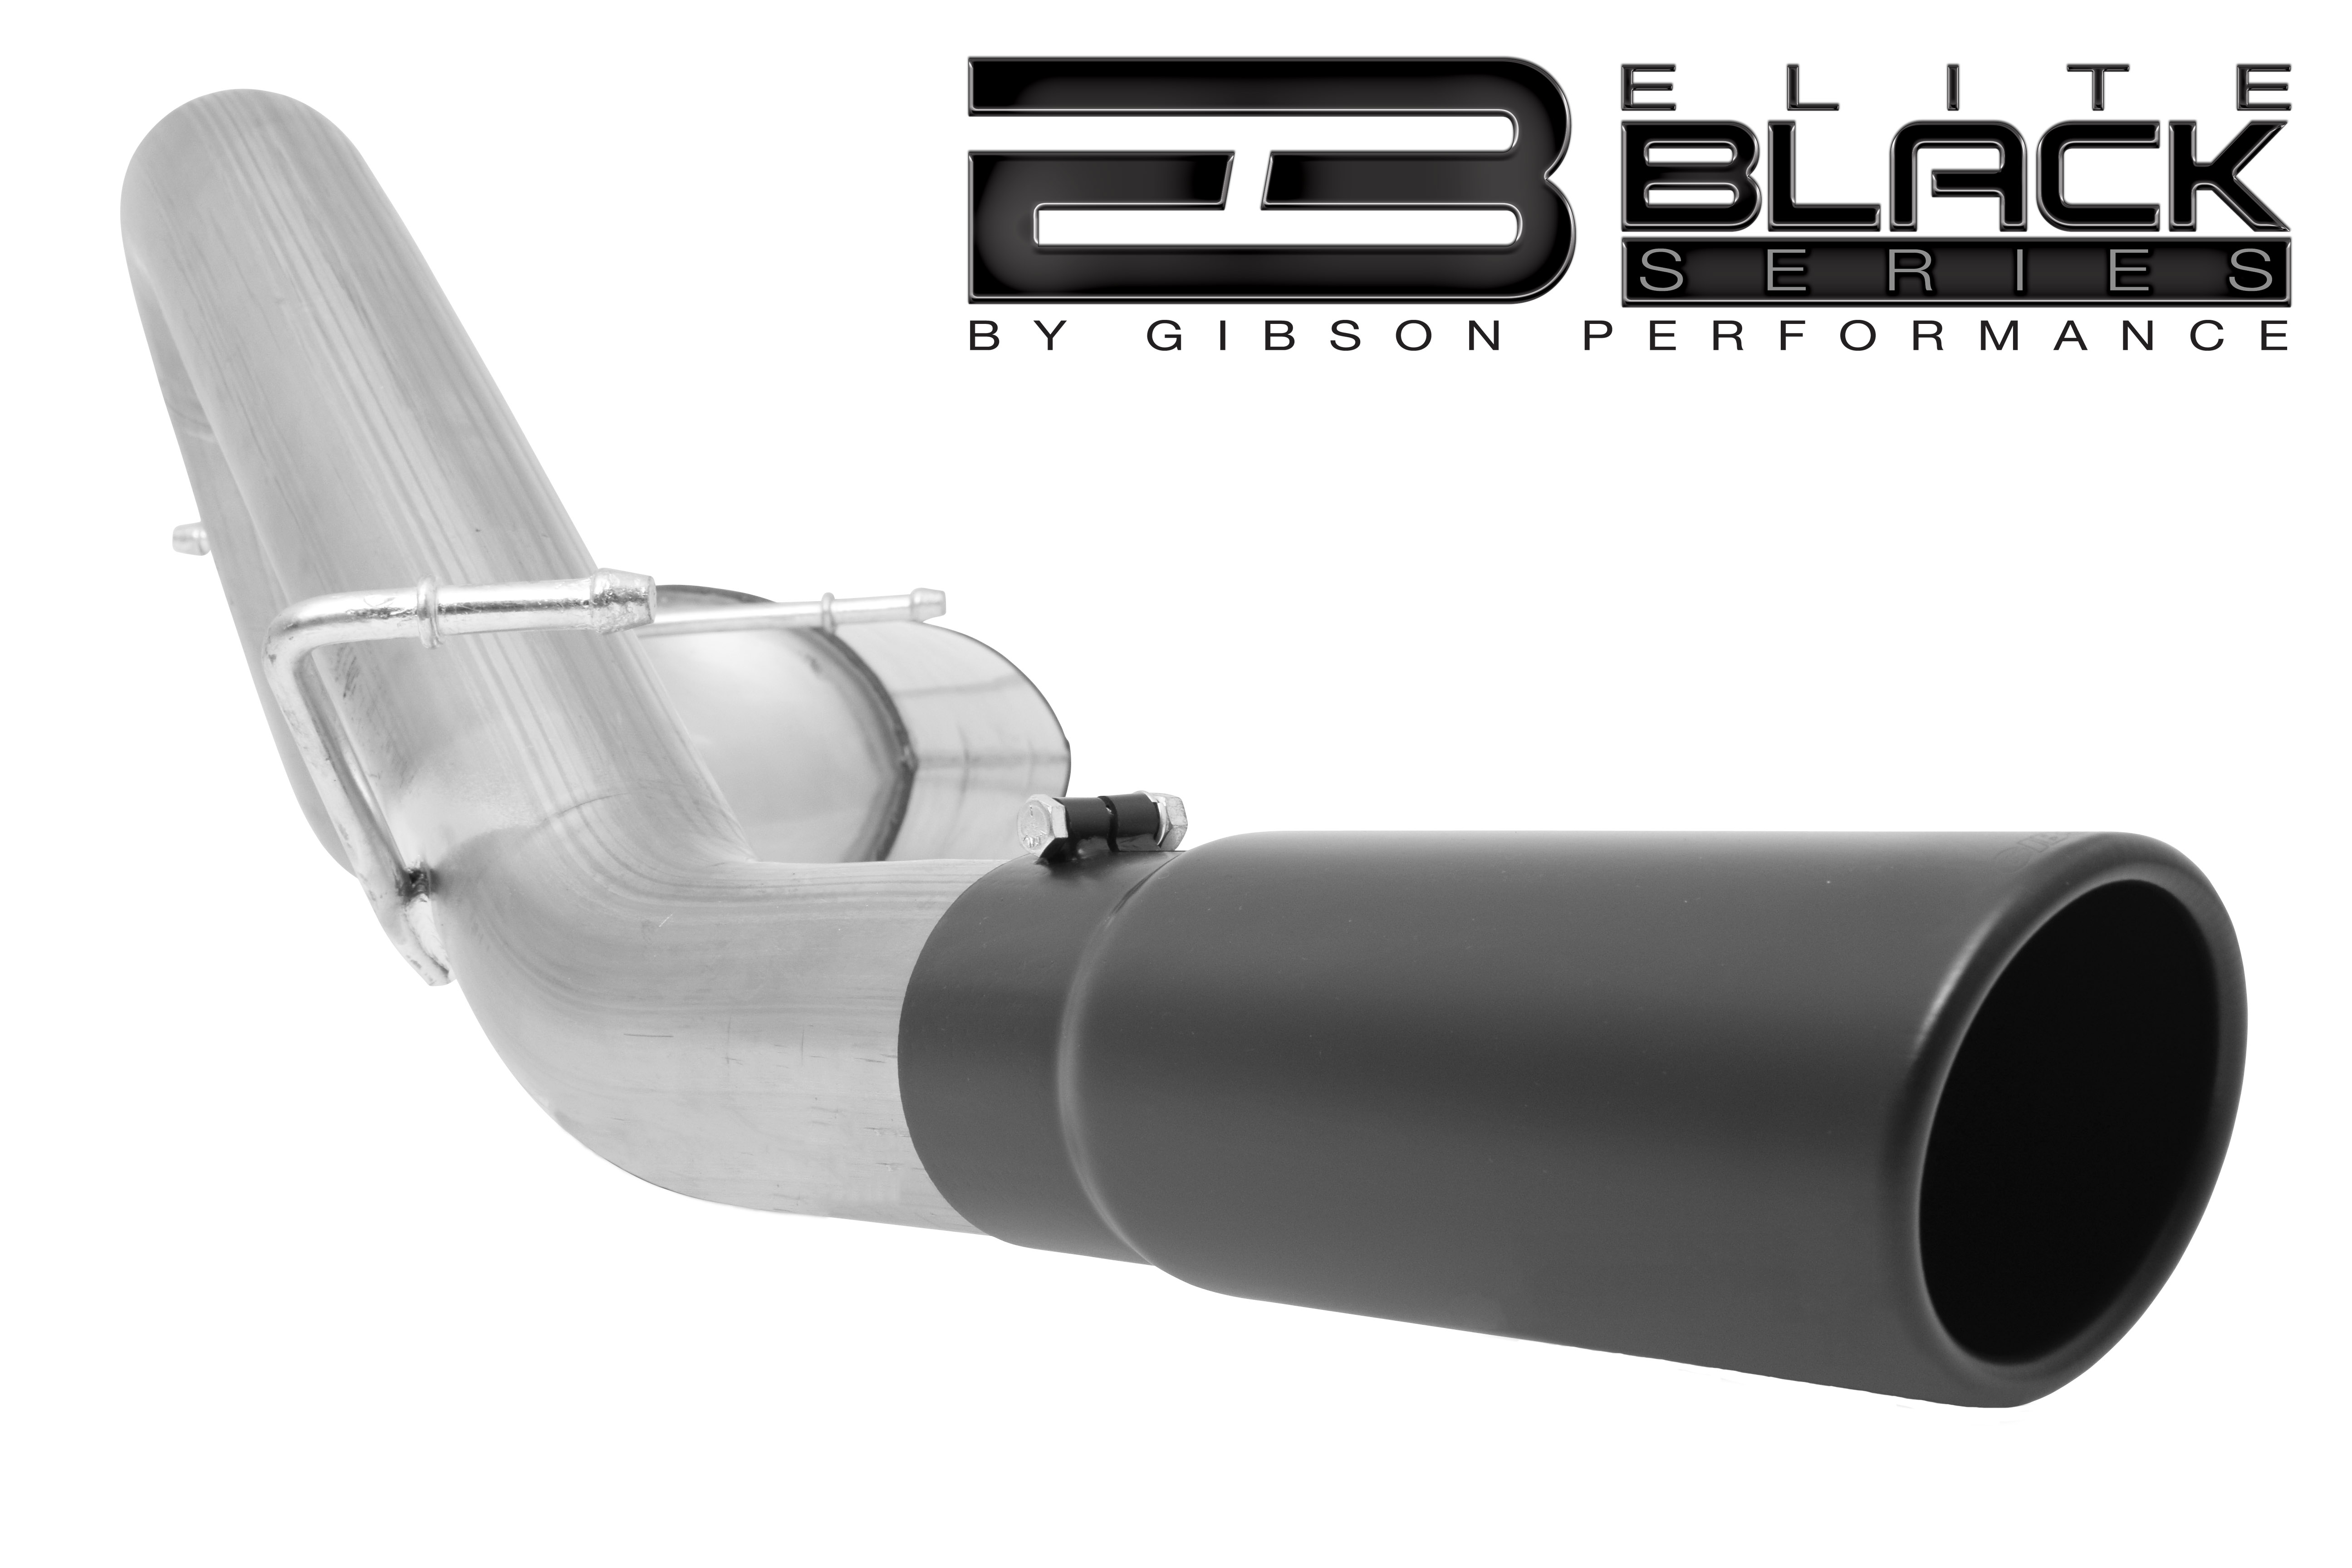 The Black Elite Series exhaust systems are designed to resonate at a deeper tone and are finished in Gibson's signature black. These intimidating dual or single exhaust systems are manufactured